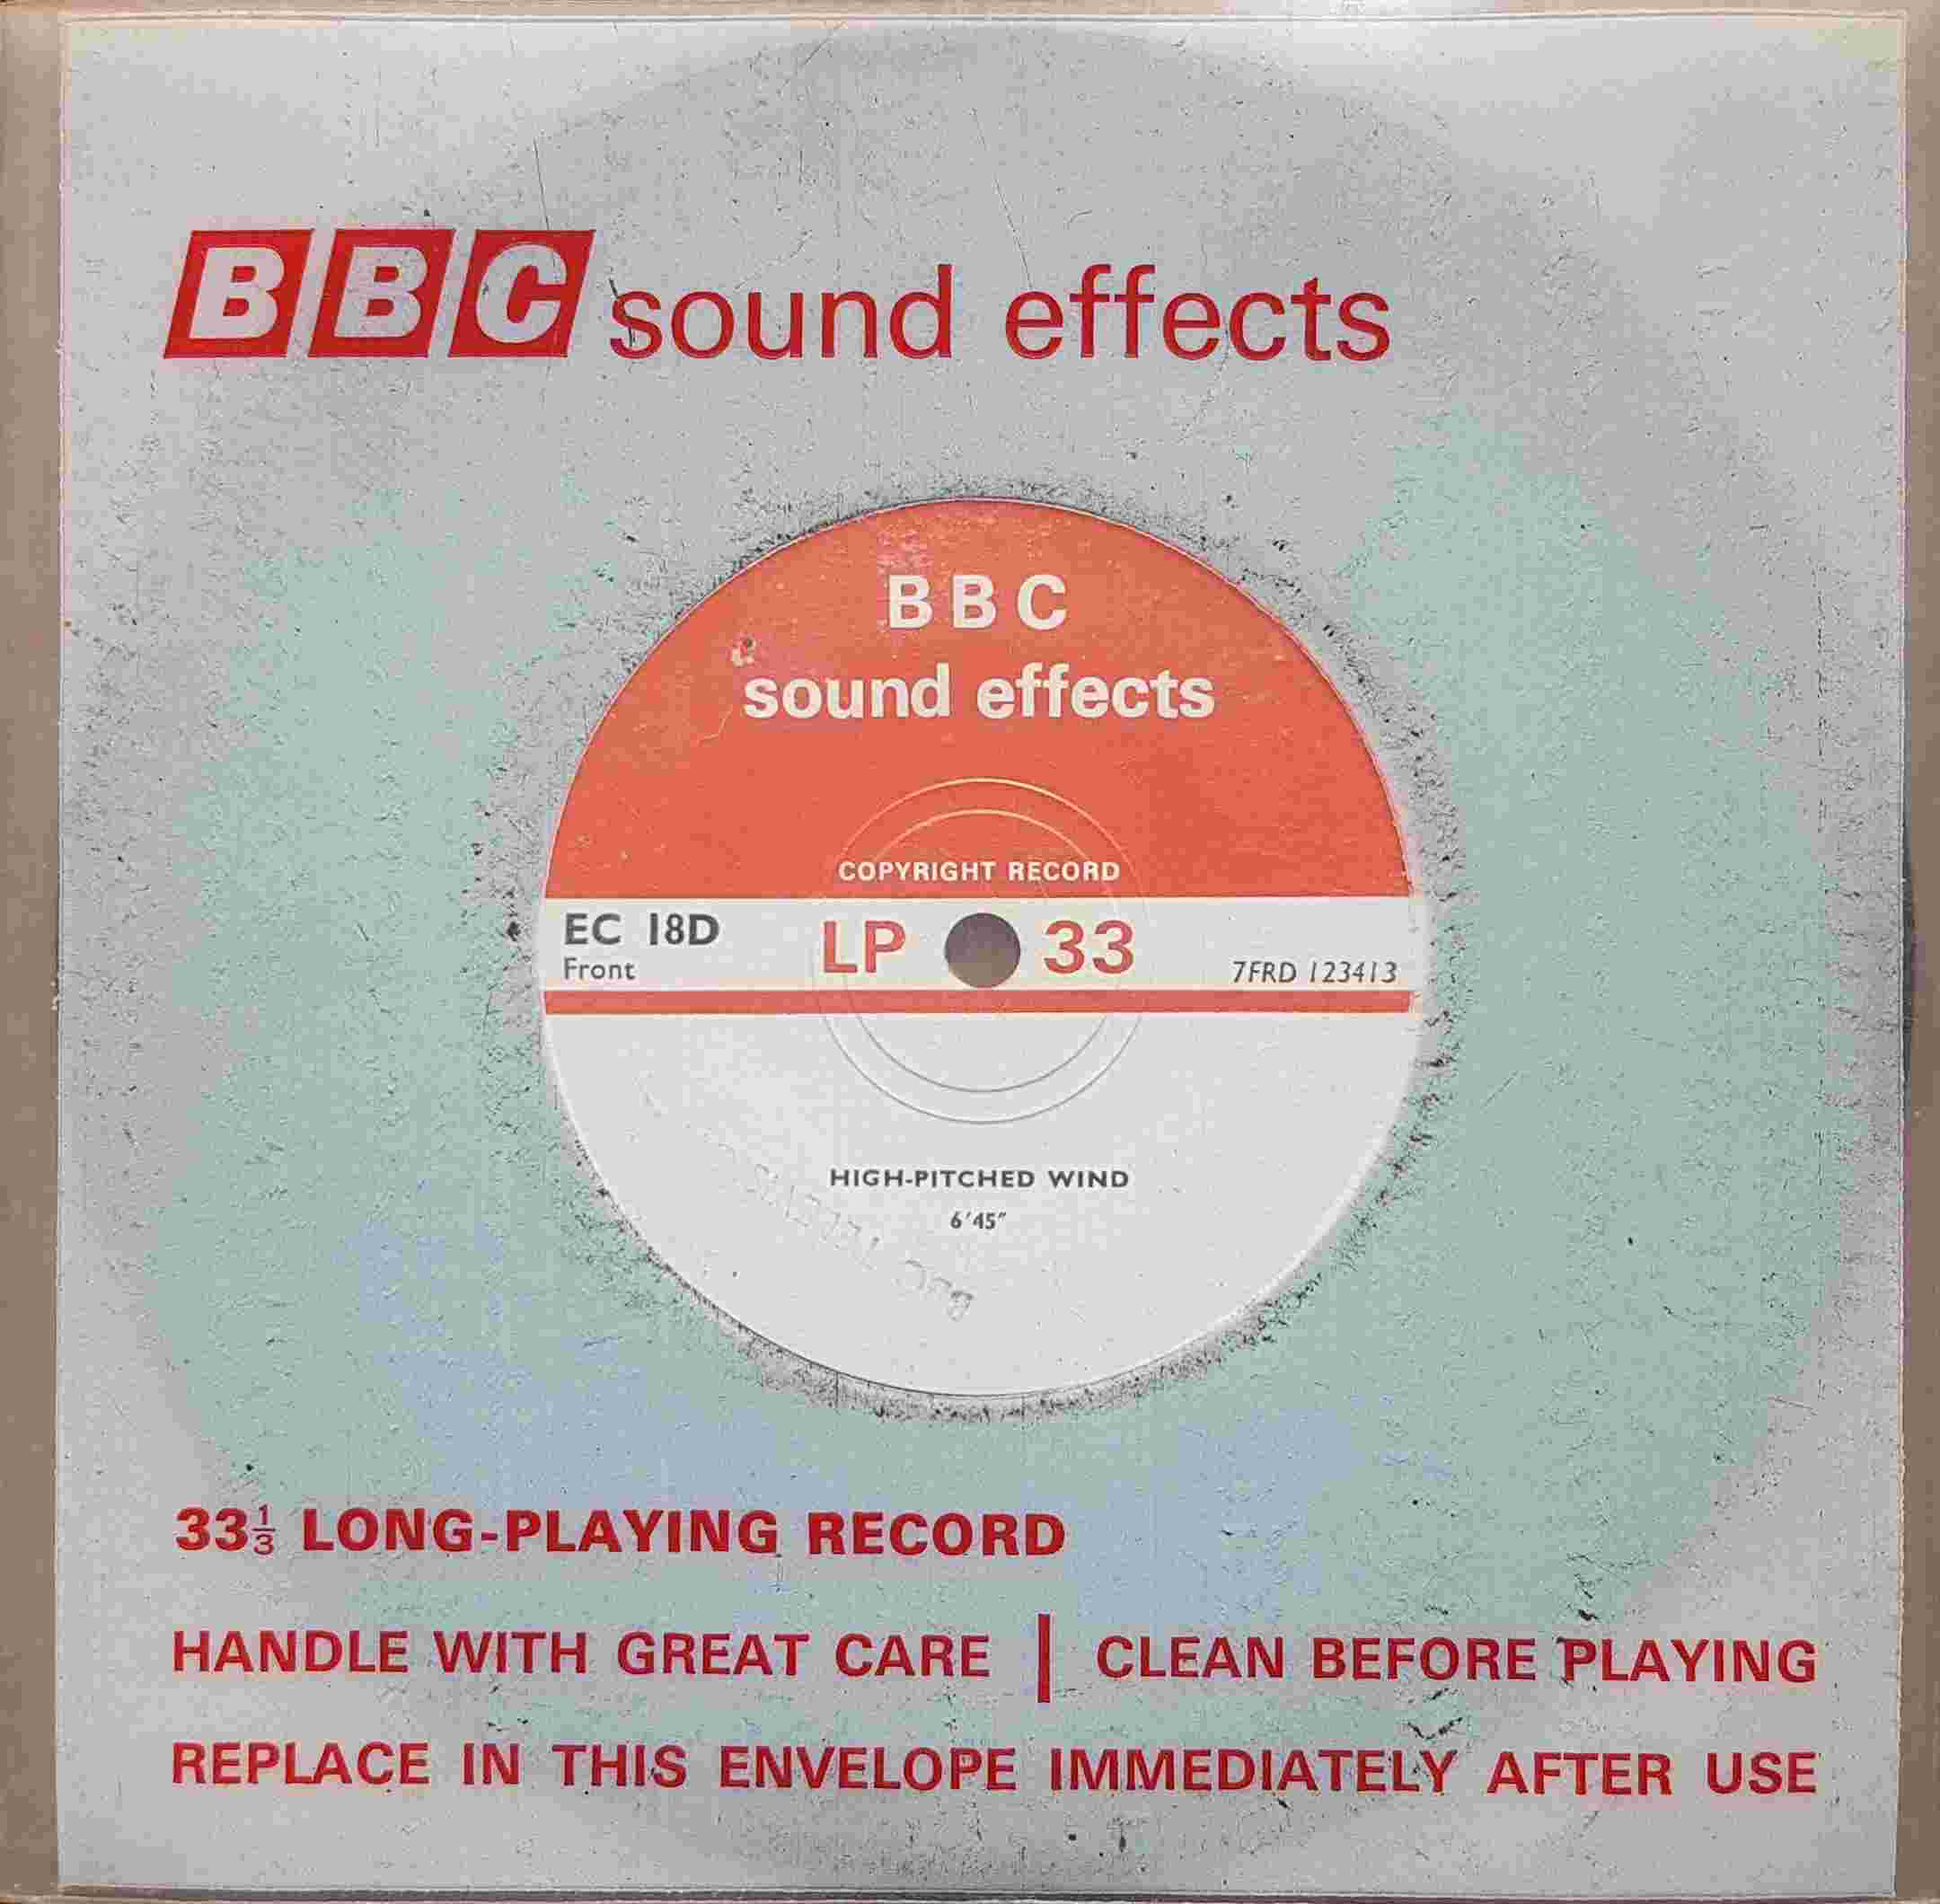 Picture of EC 18D Wind by artist Not registered from the BBC records and Tapes library